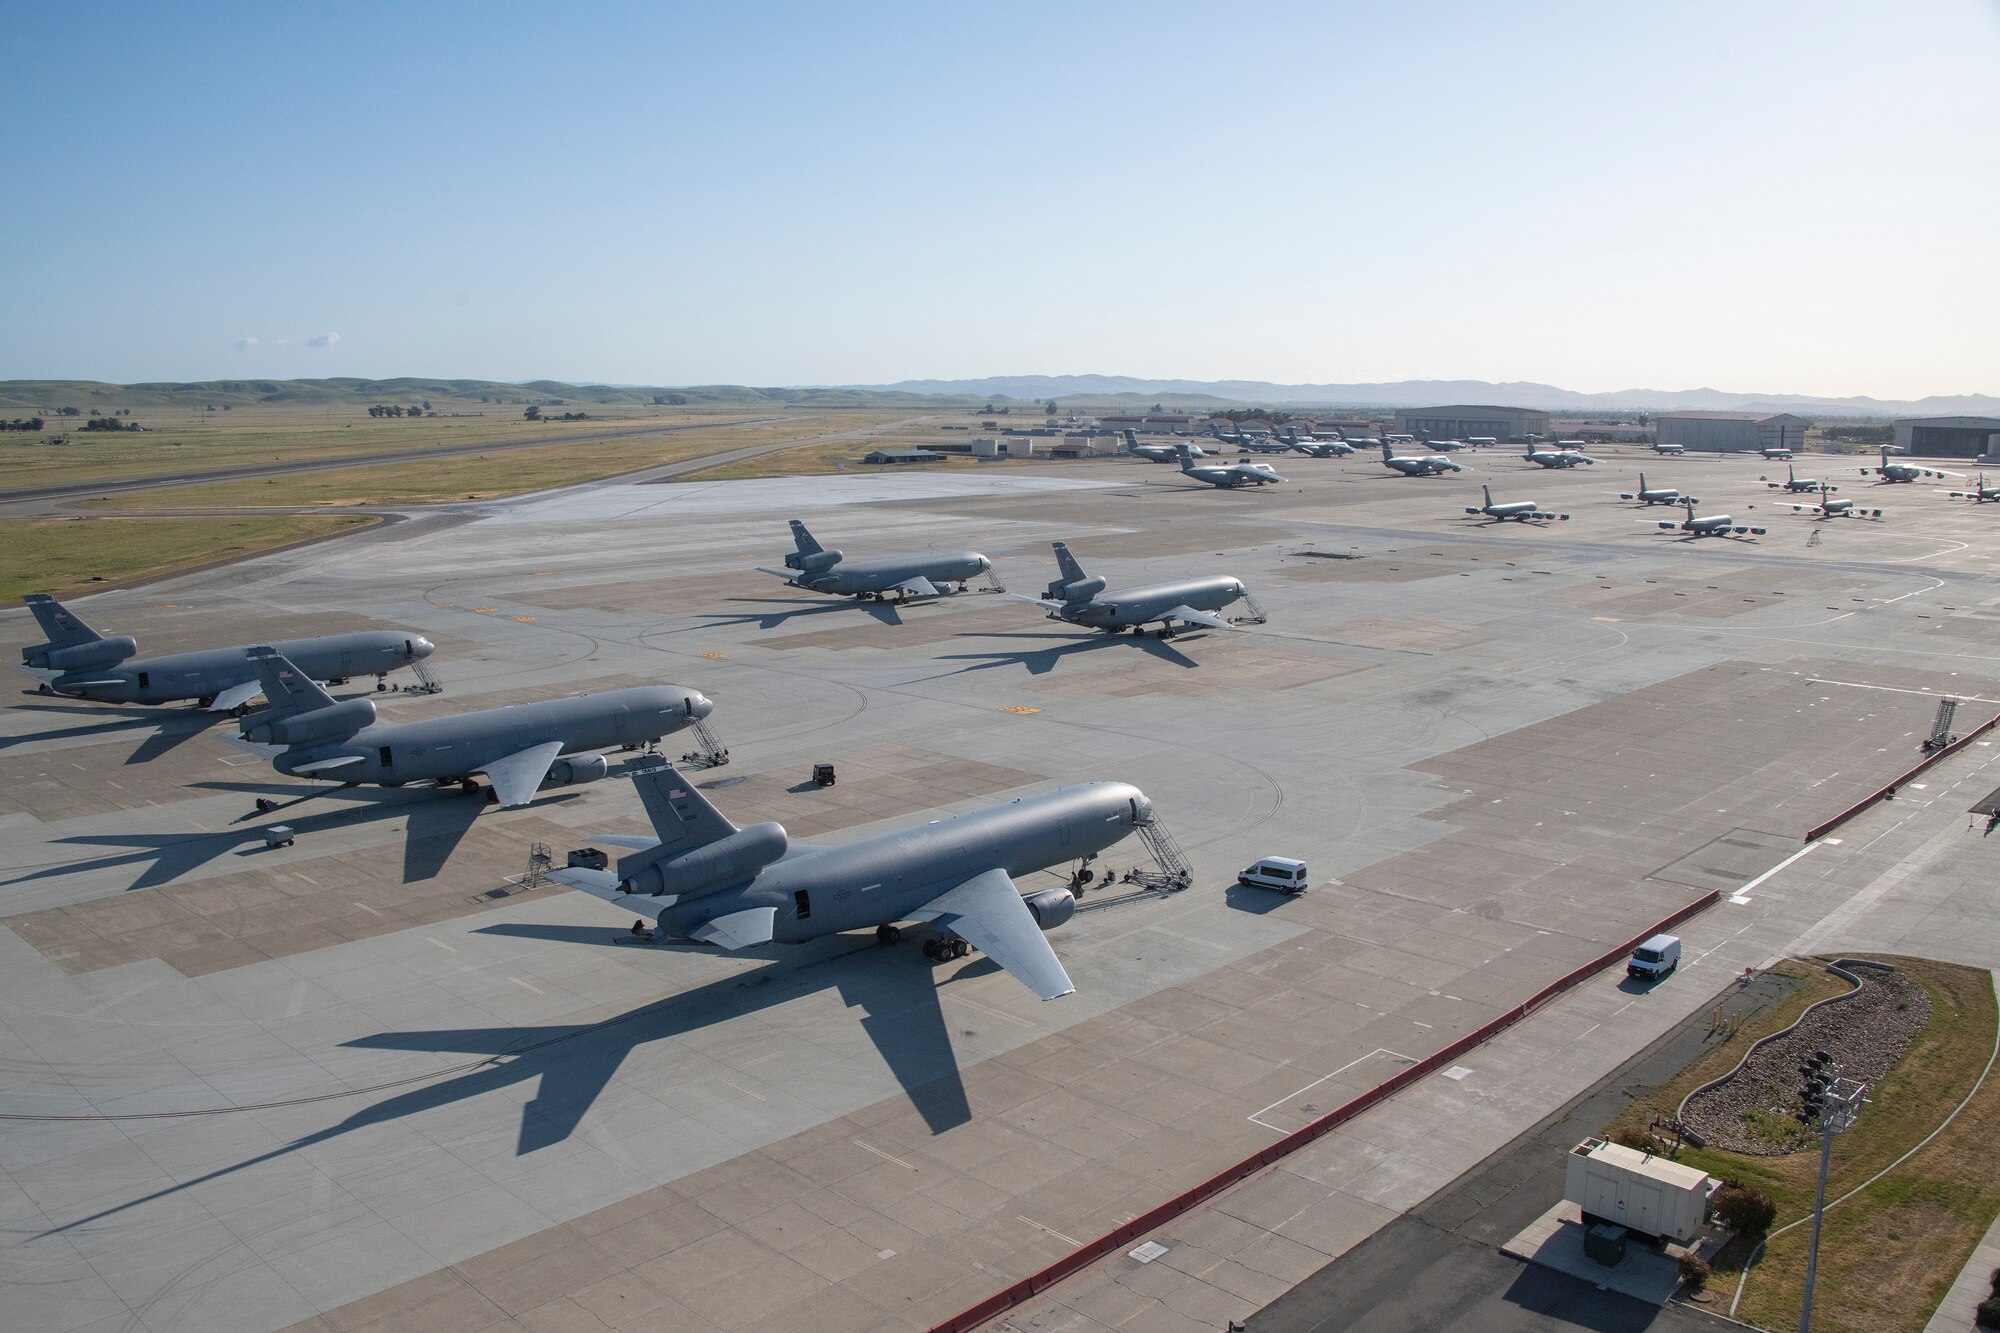 airplanes on the flight line